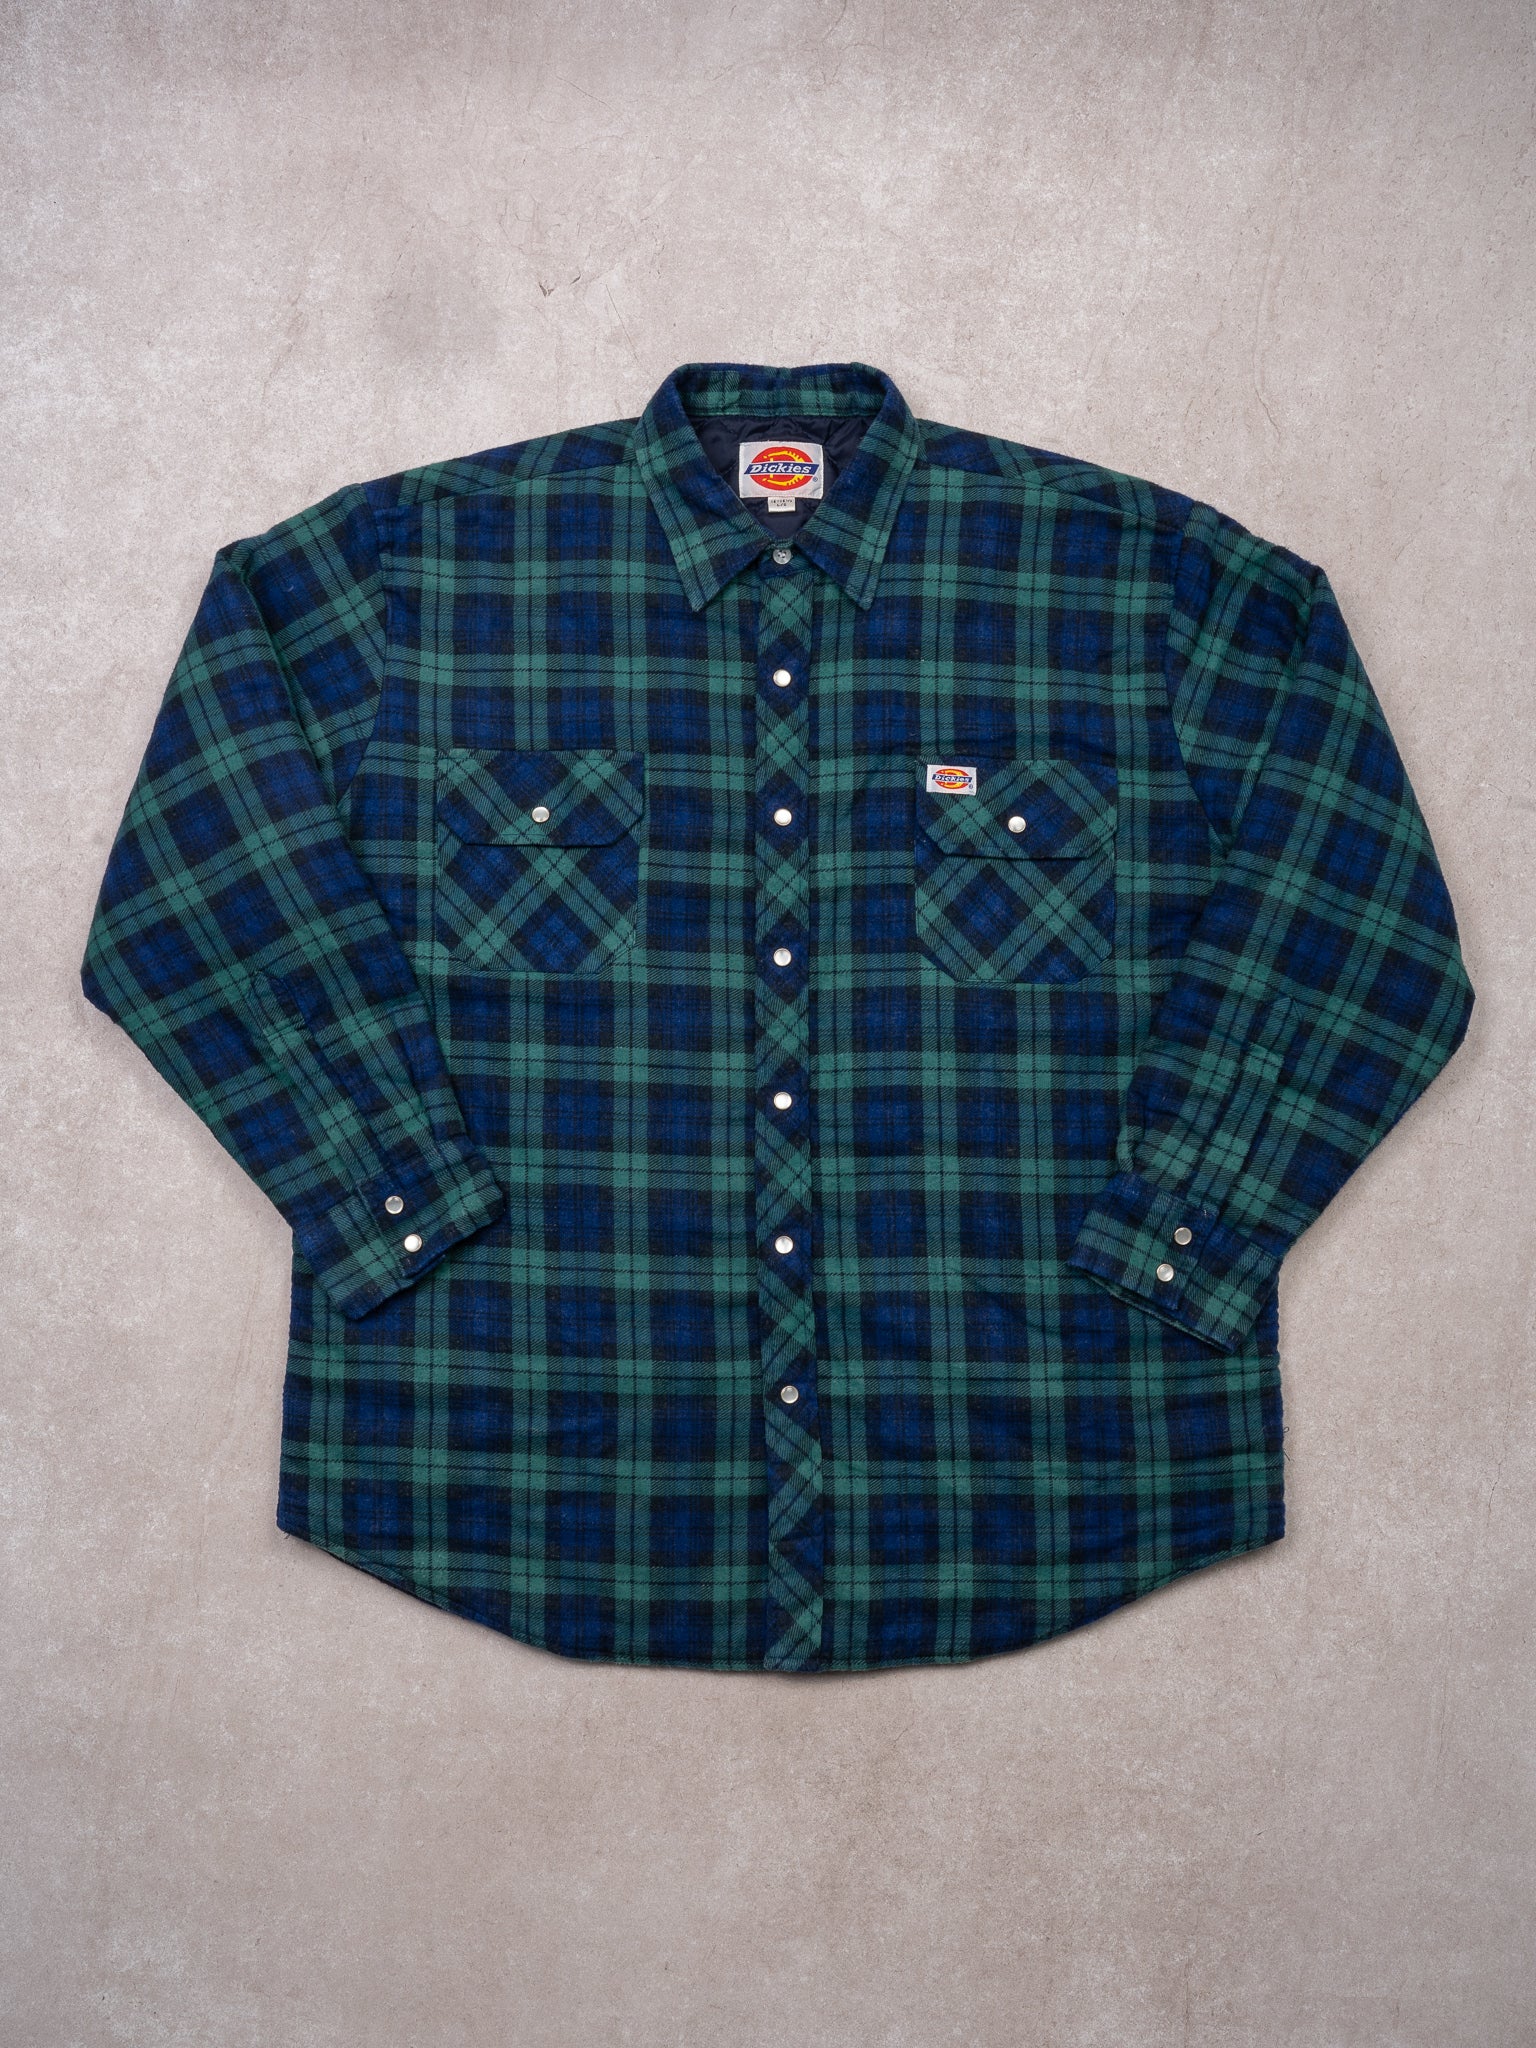 Vintage Blue + Green Plaid DIckies Insulated Jacket (L)